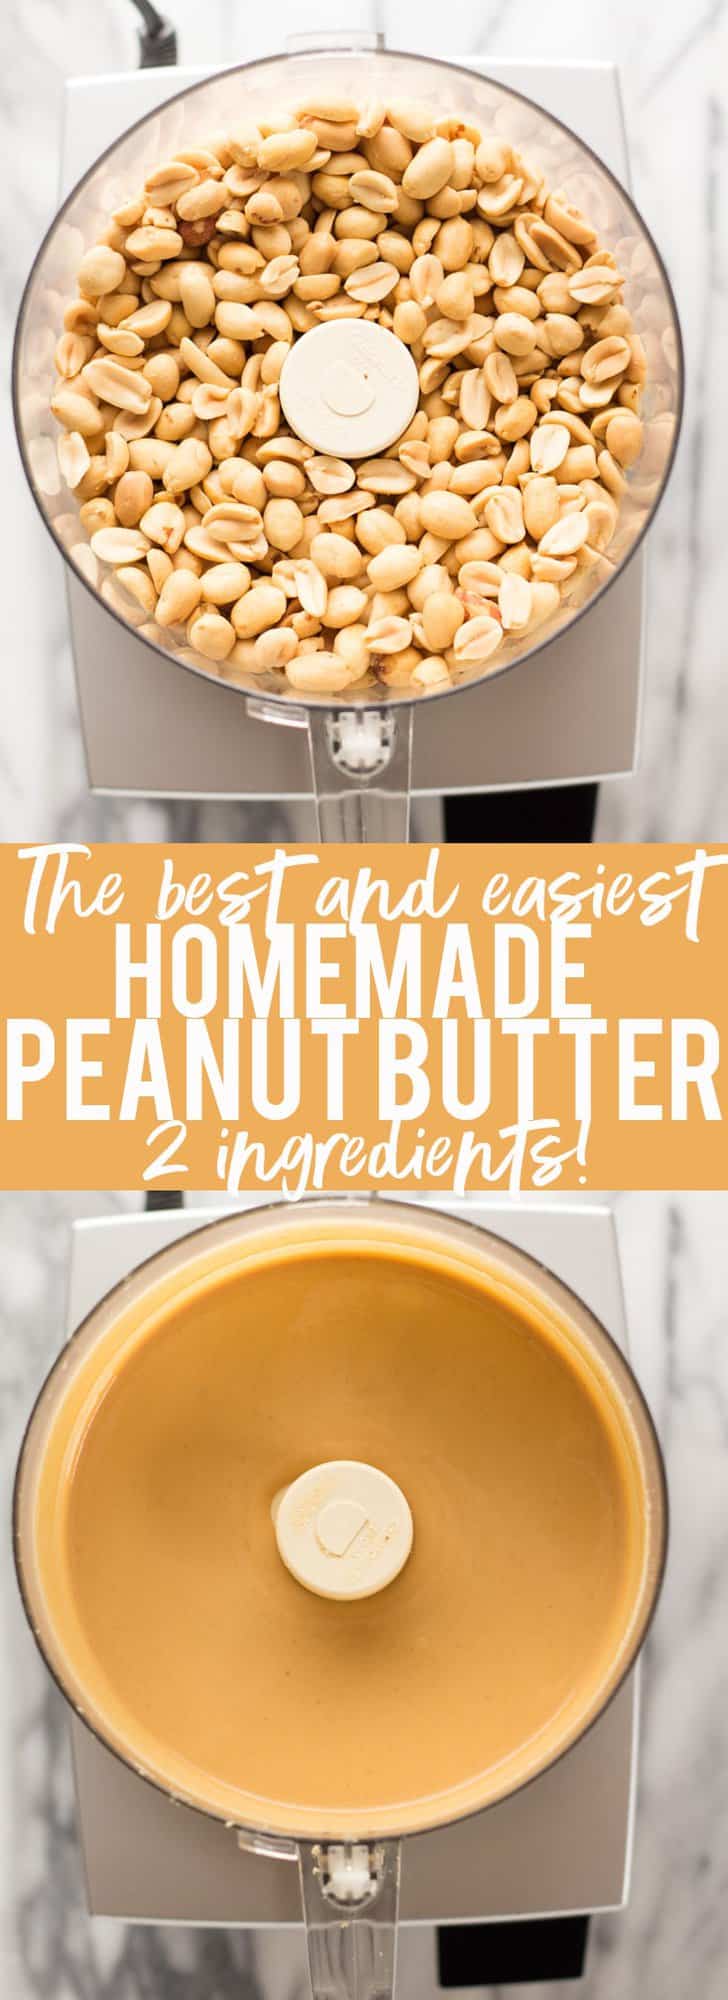 How to make peanut butter at home! I will show you how to make The Best and Easiest Homemade Peanut Butter! You will never buy store bought again!